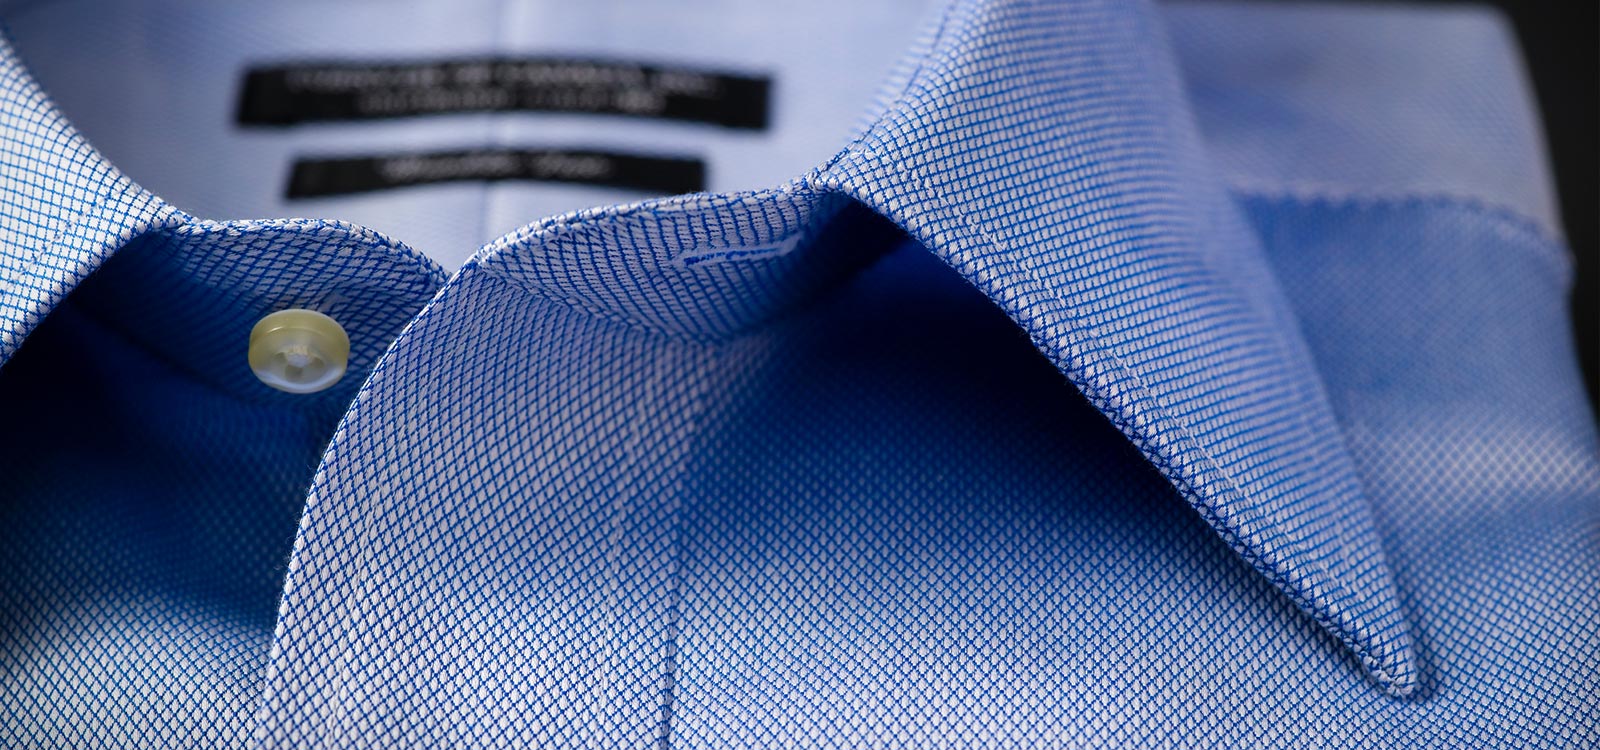 Finding the best dress shirt for dancers